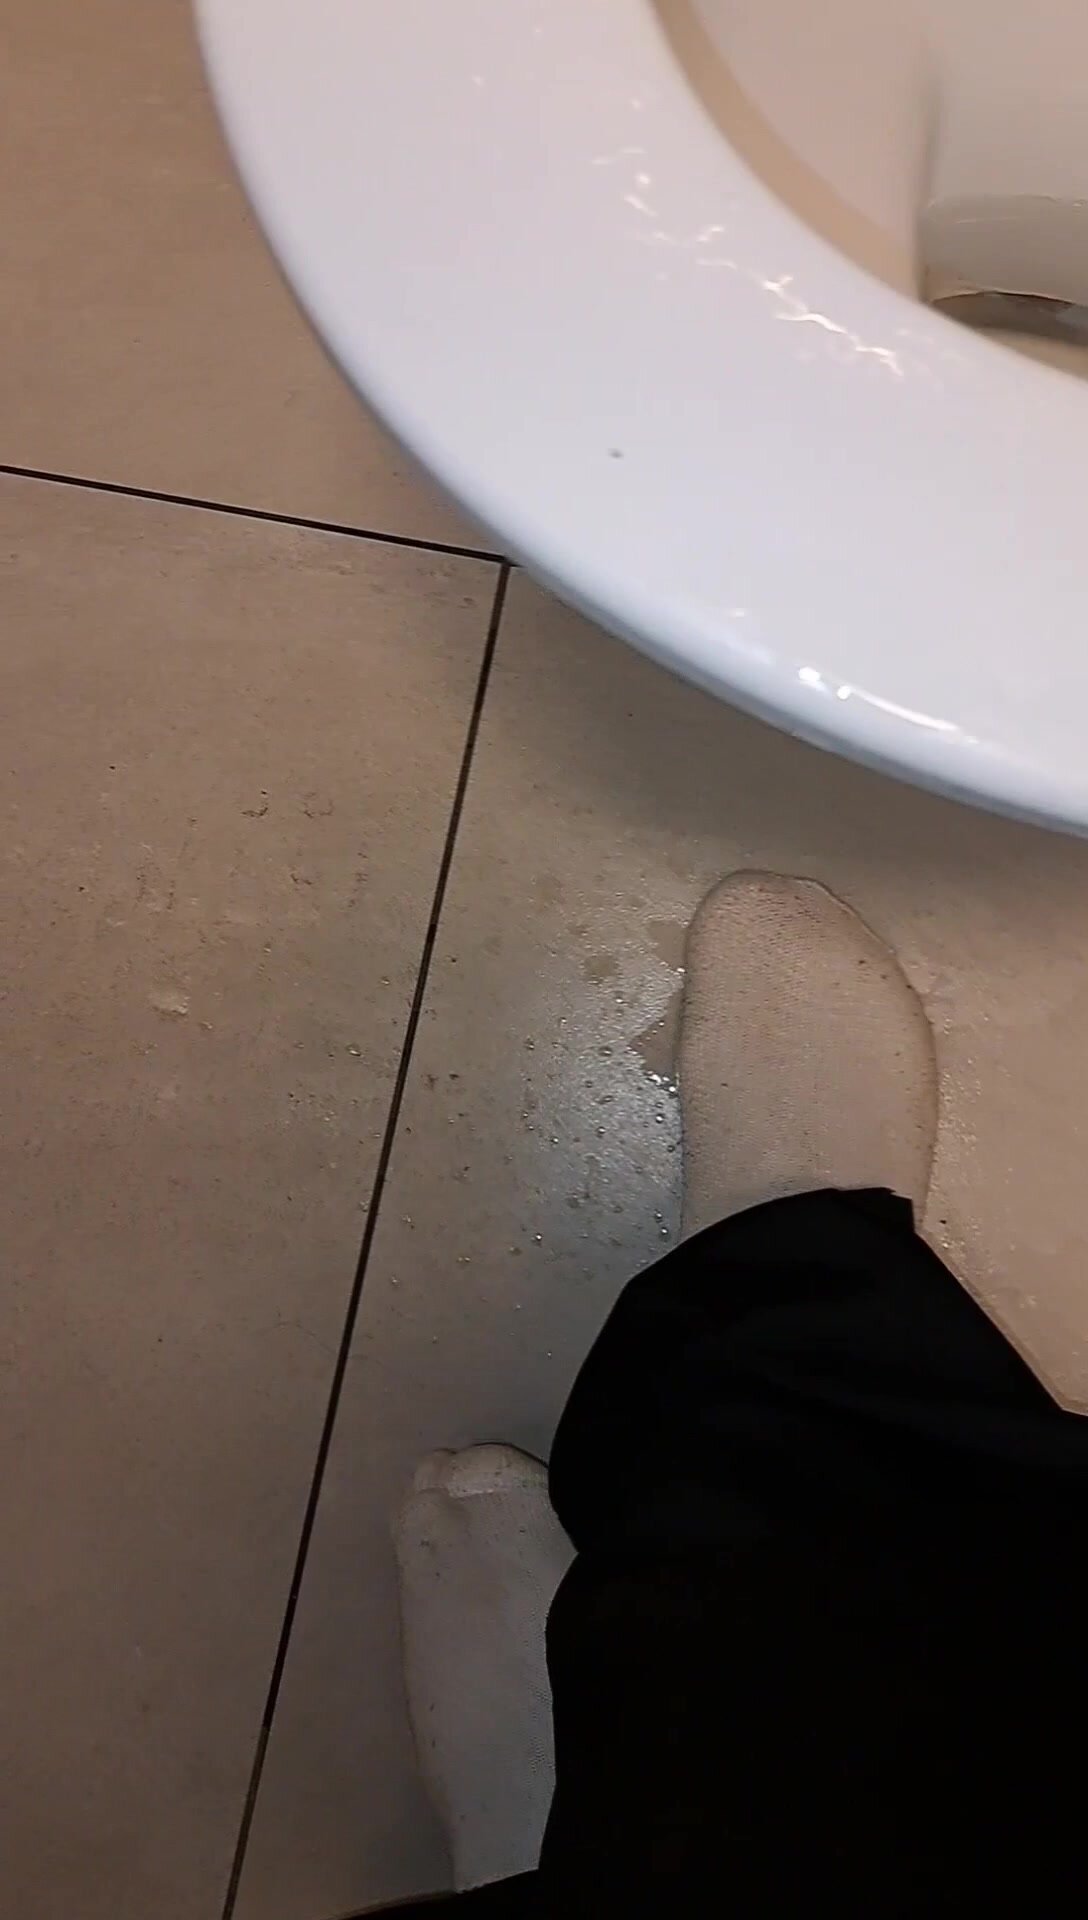 Only whit socks,for 6 days, in 6 public toilet PART 2